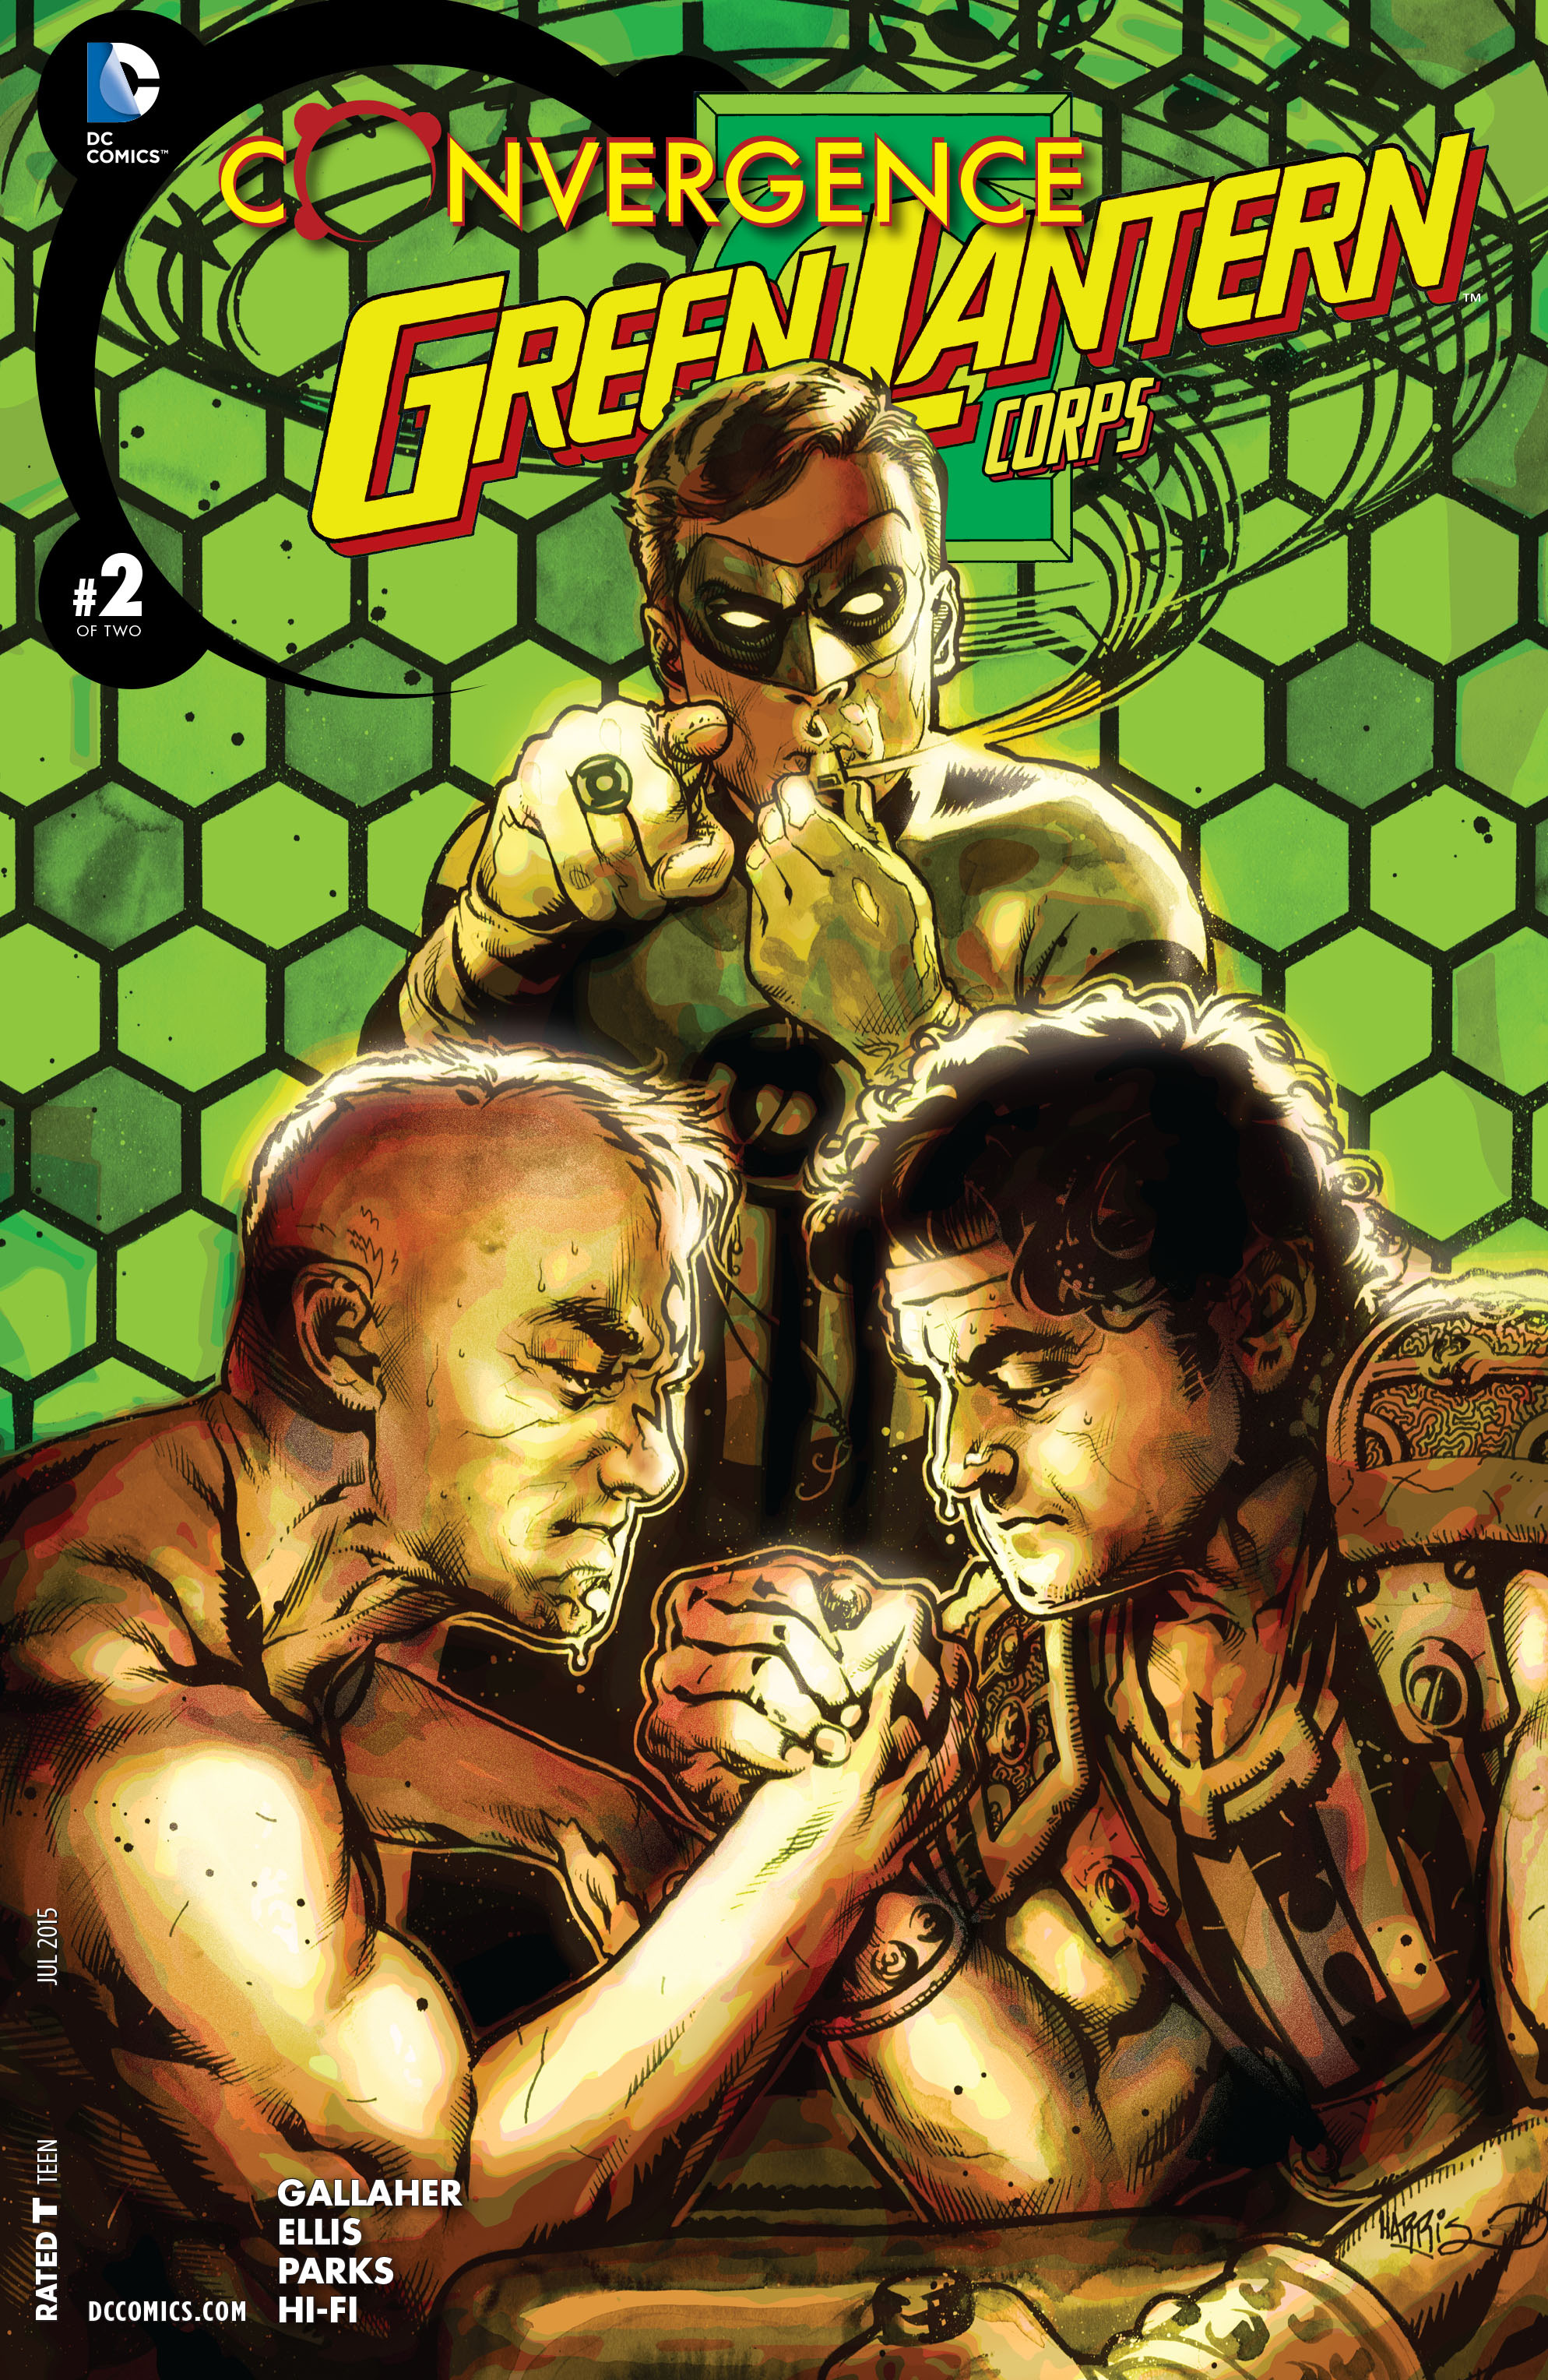 Read online Convergence Green Lantern Corps comic -  Issue #2 - 1